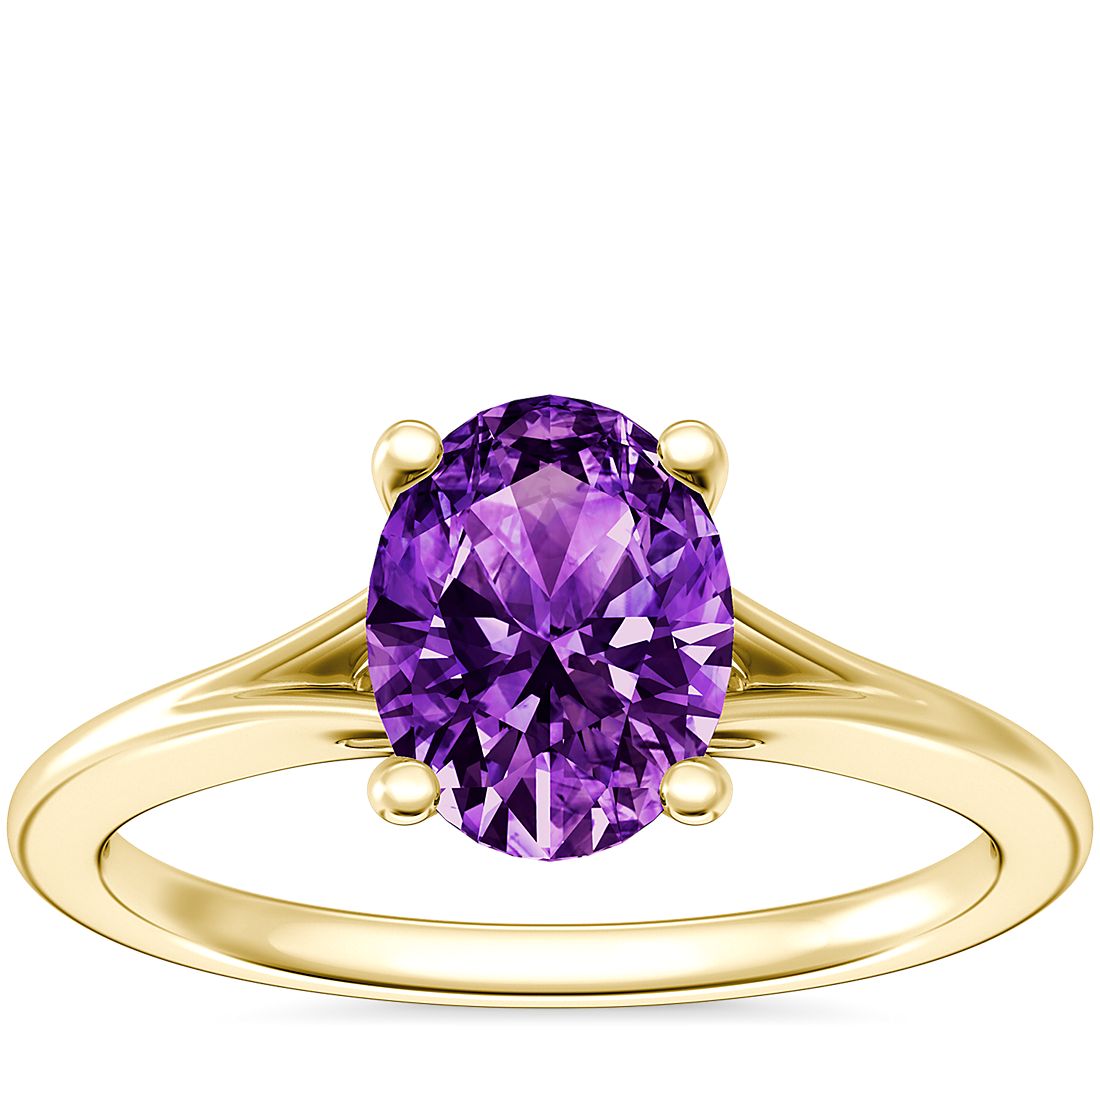 Petite Split Shank Solitaire Engagement Ring with Oval Amethyst in 18k Yellow Gold (8x6mm)